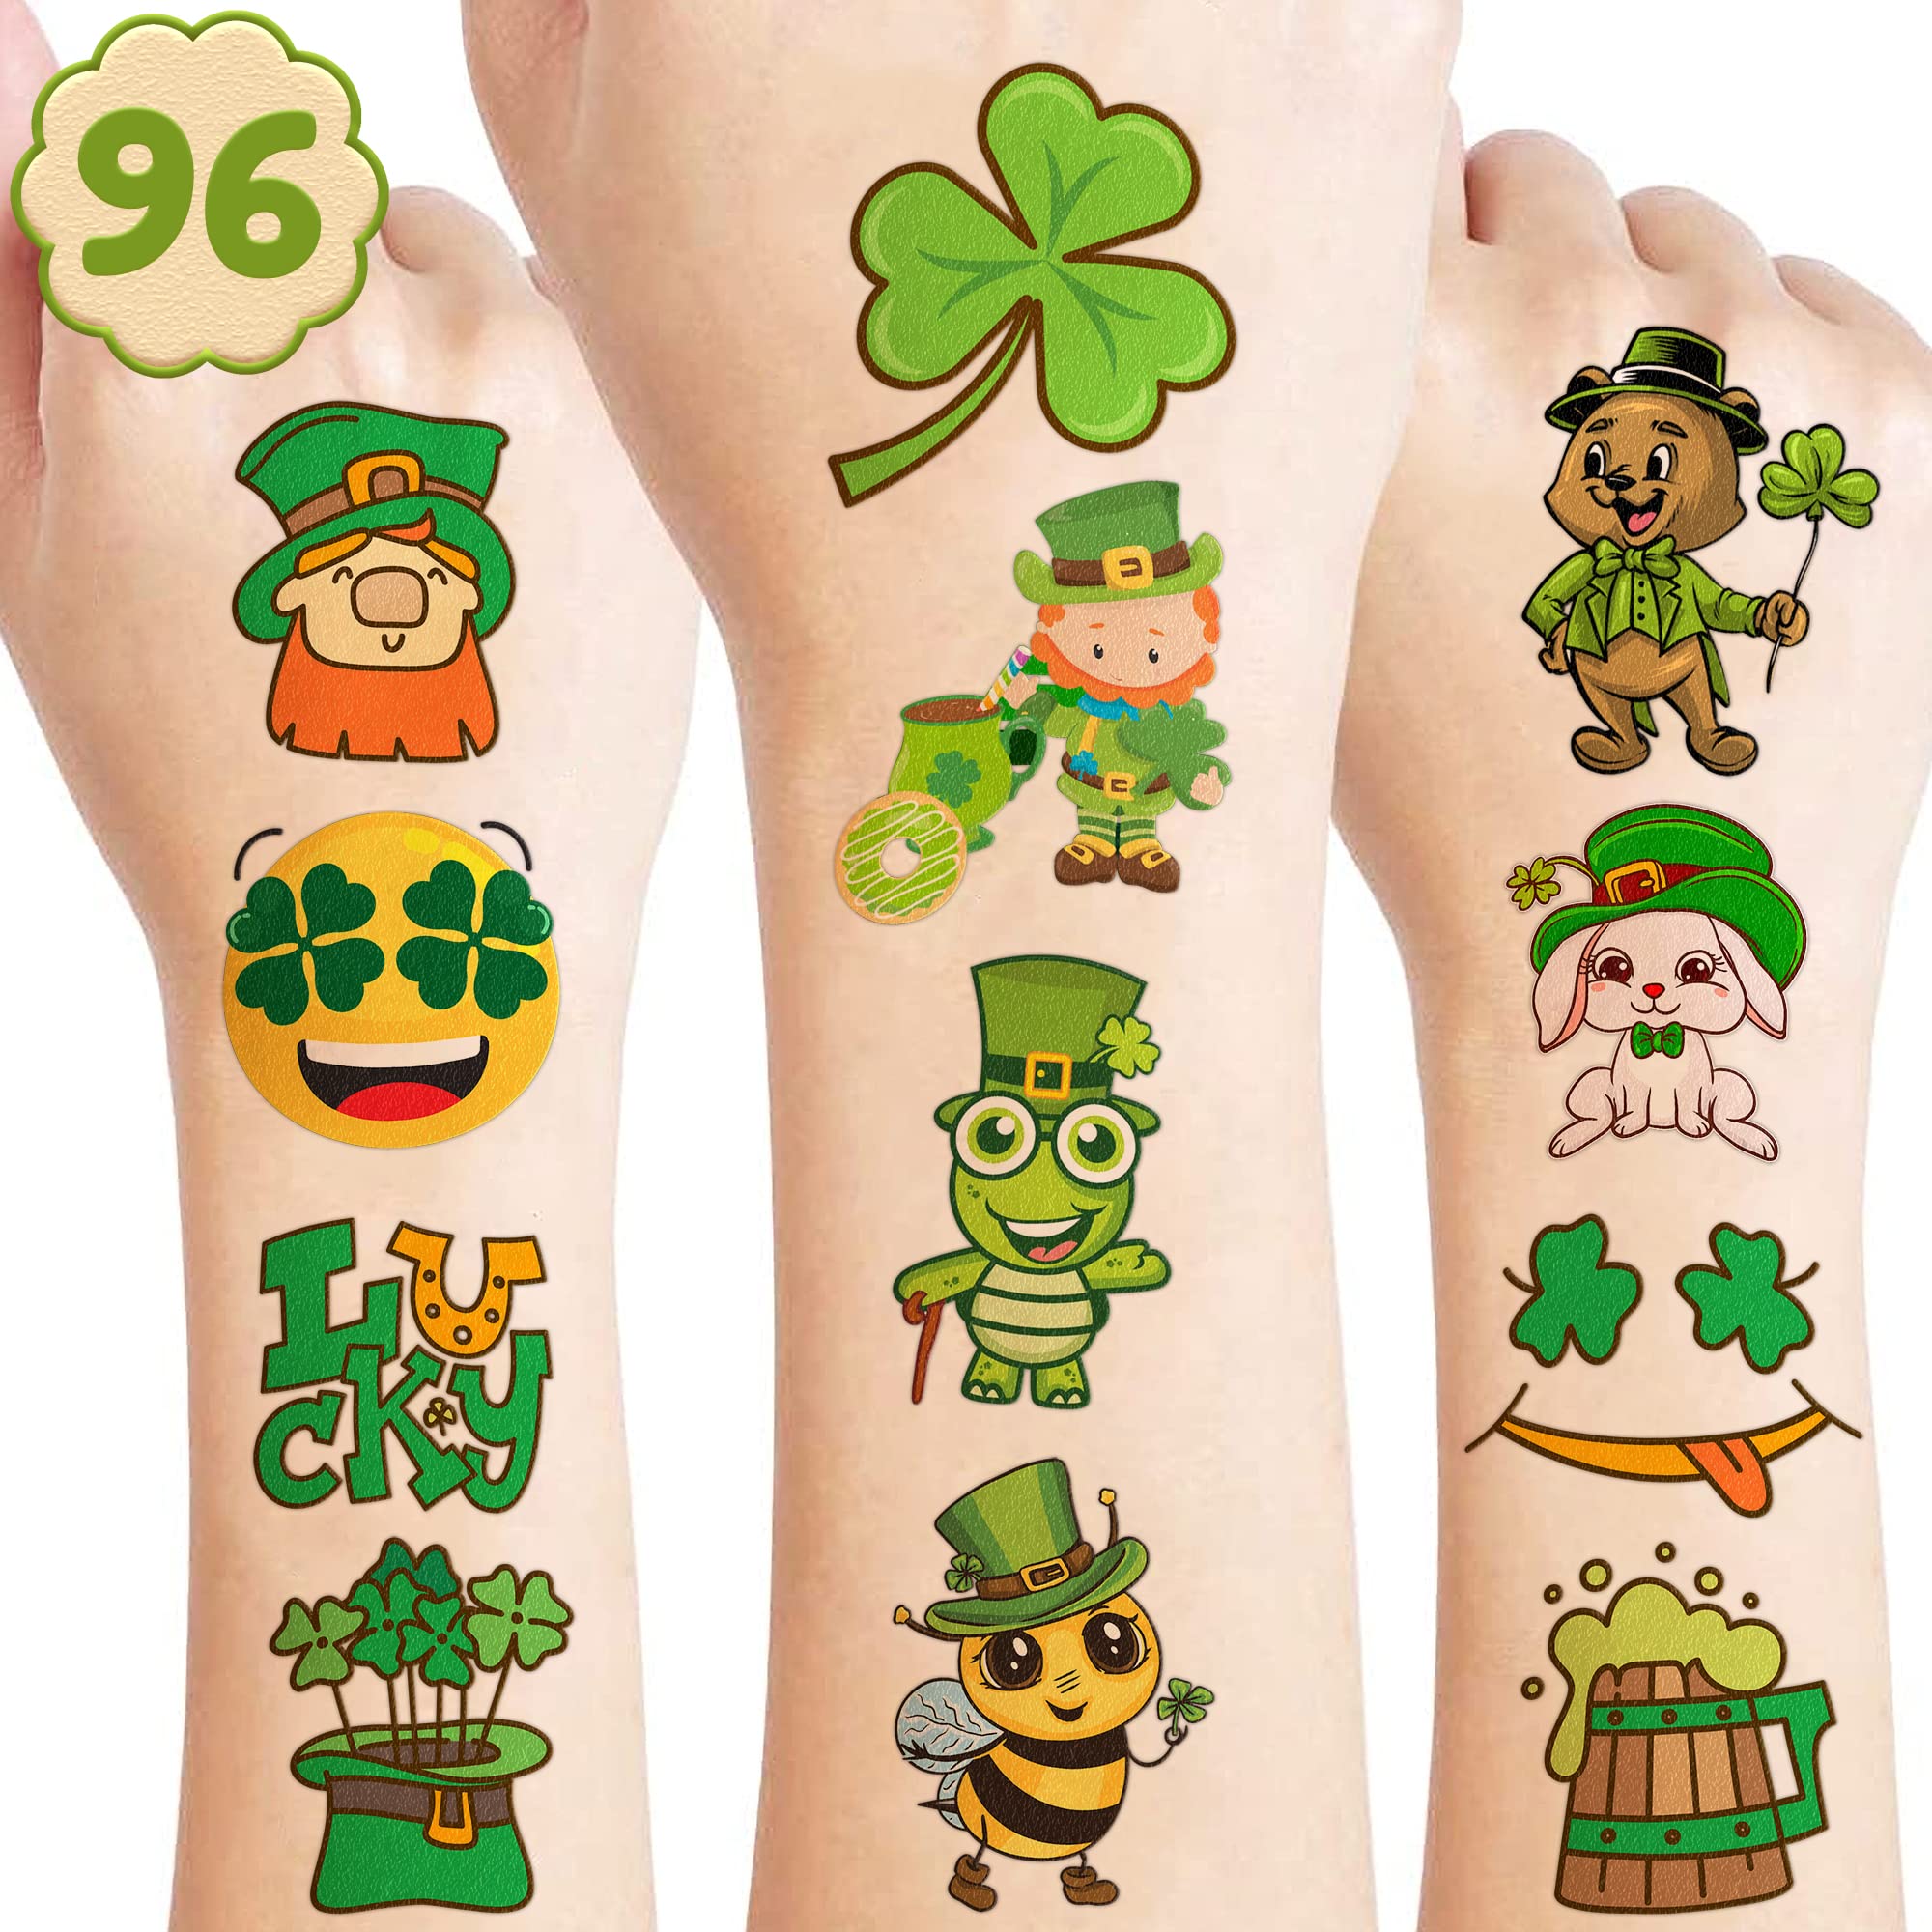 Mkwntg 12 Sheets Cute Temporary Tattoos Stickers for Kids, India | Ubuy